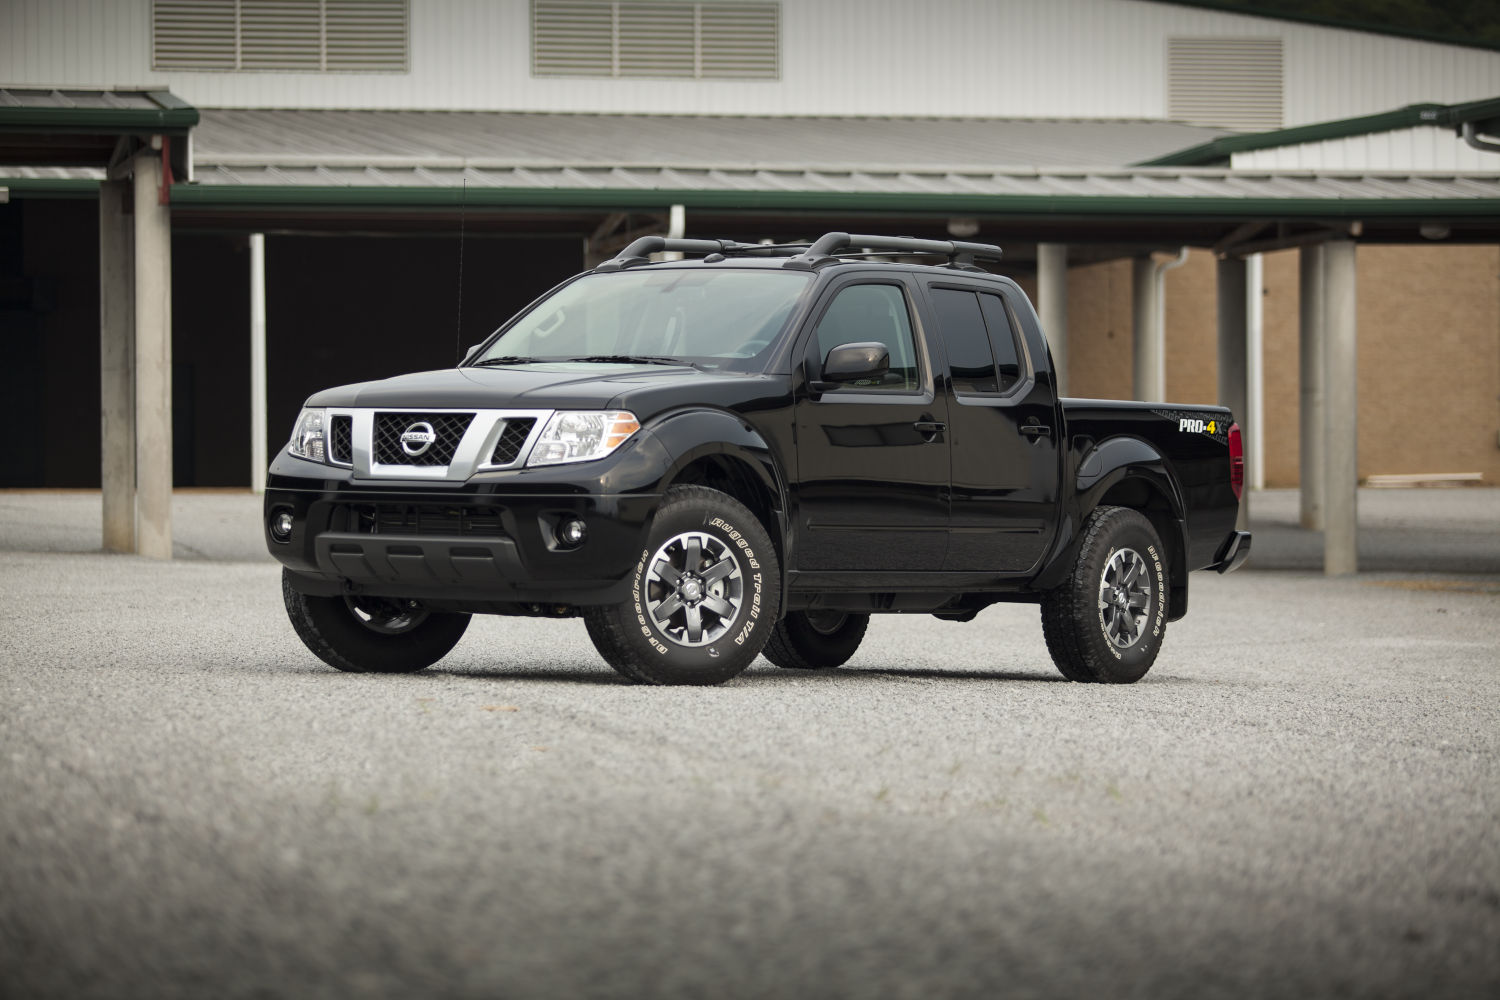 This Nissan Frontier truck will last a long time